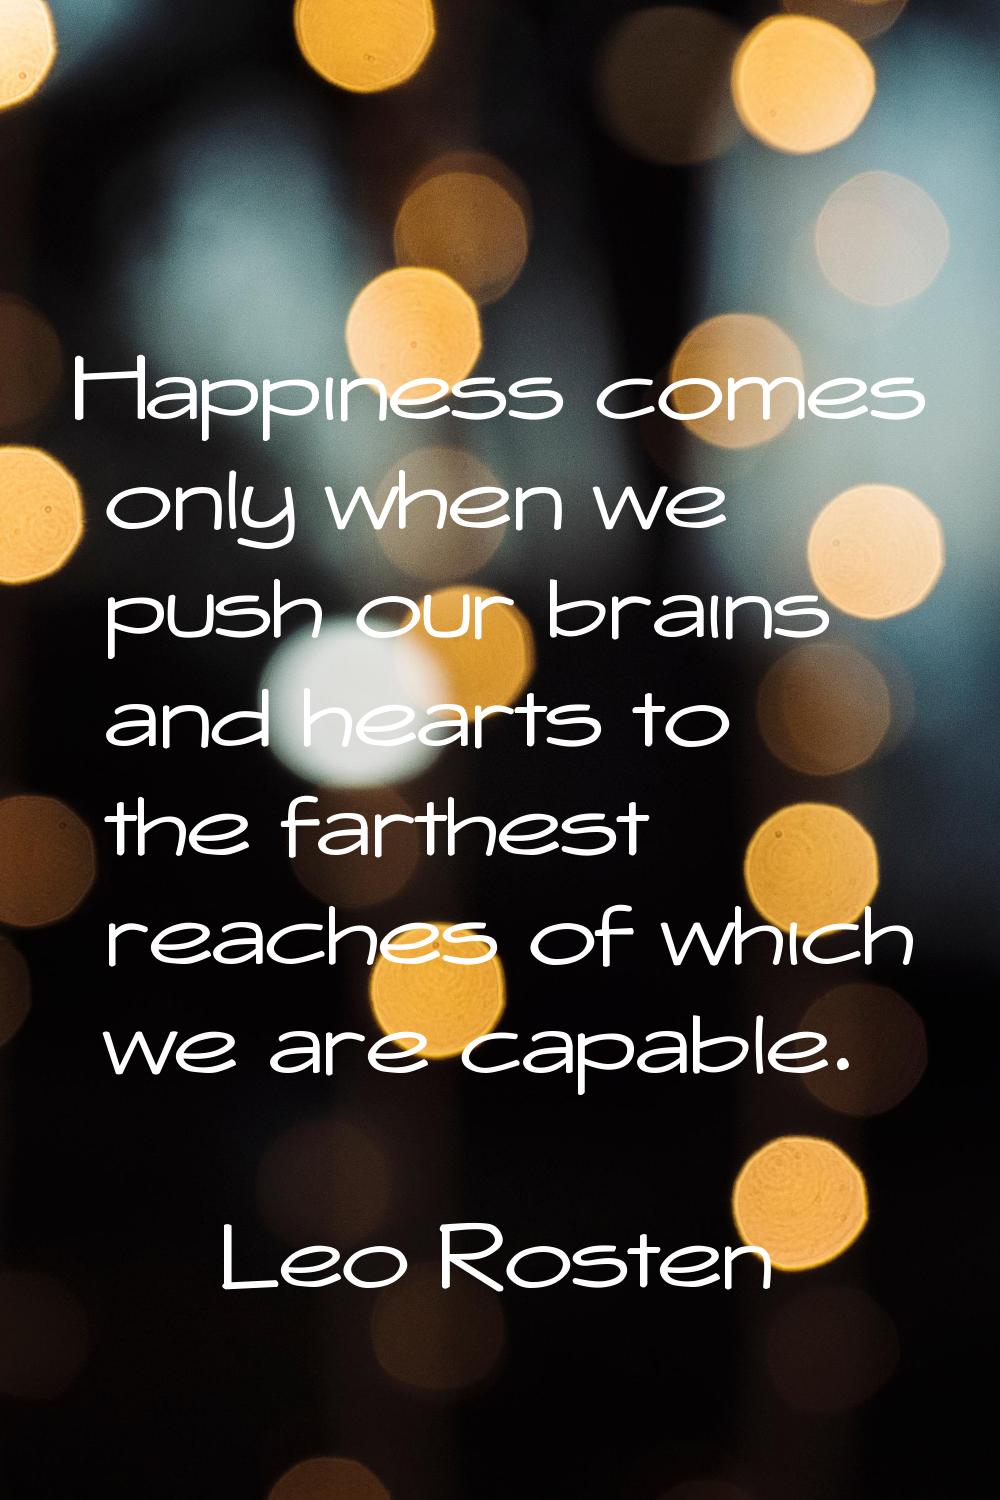 Happiness comes only when we push our brains and hearts to the farthest reaches of which we are cap